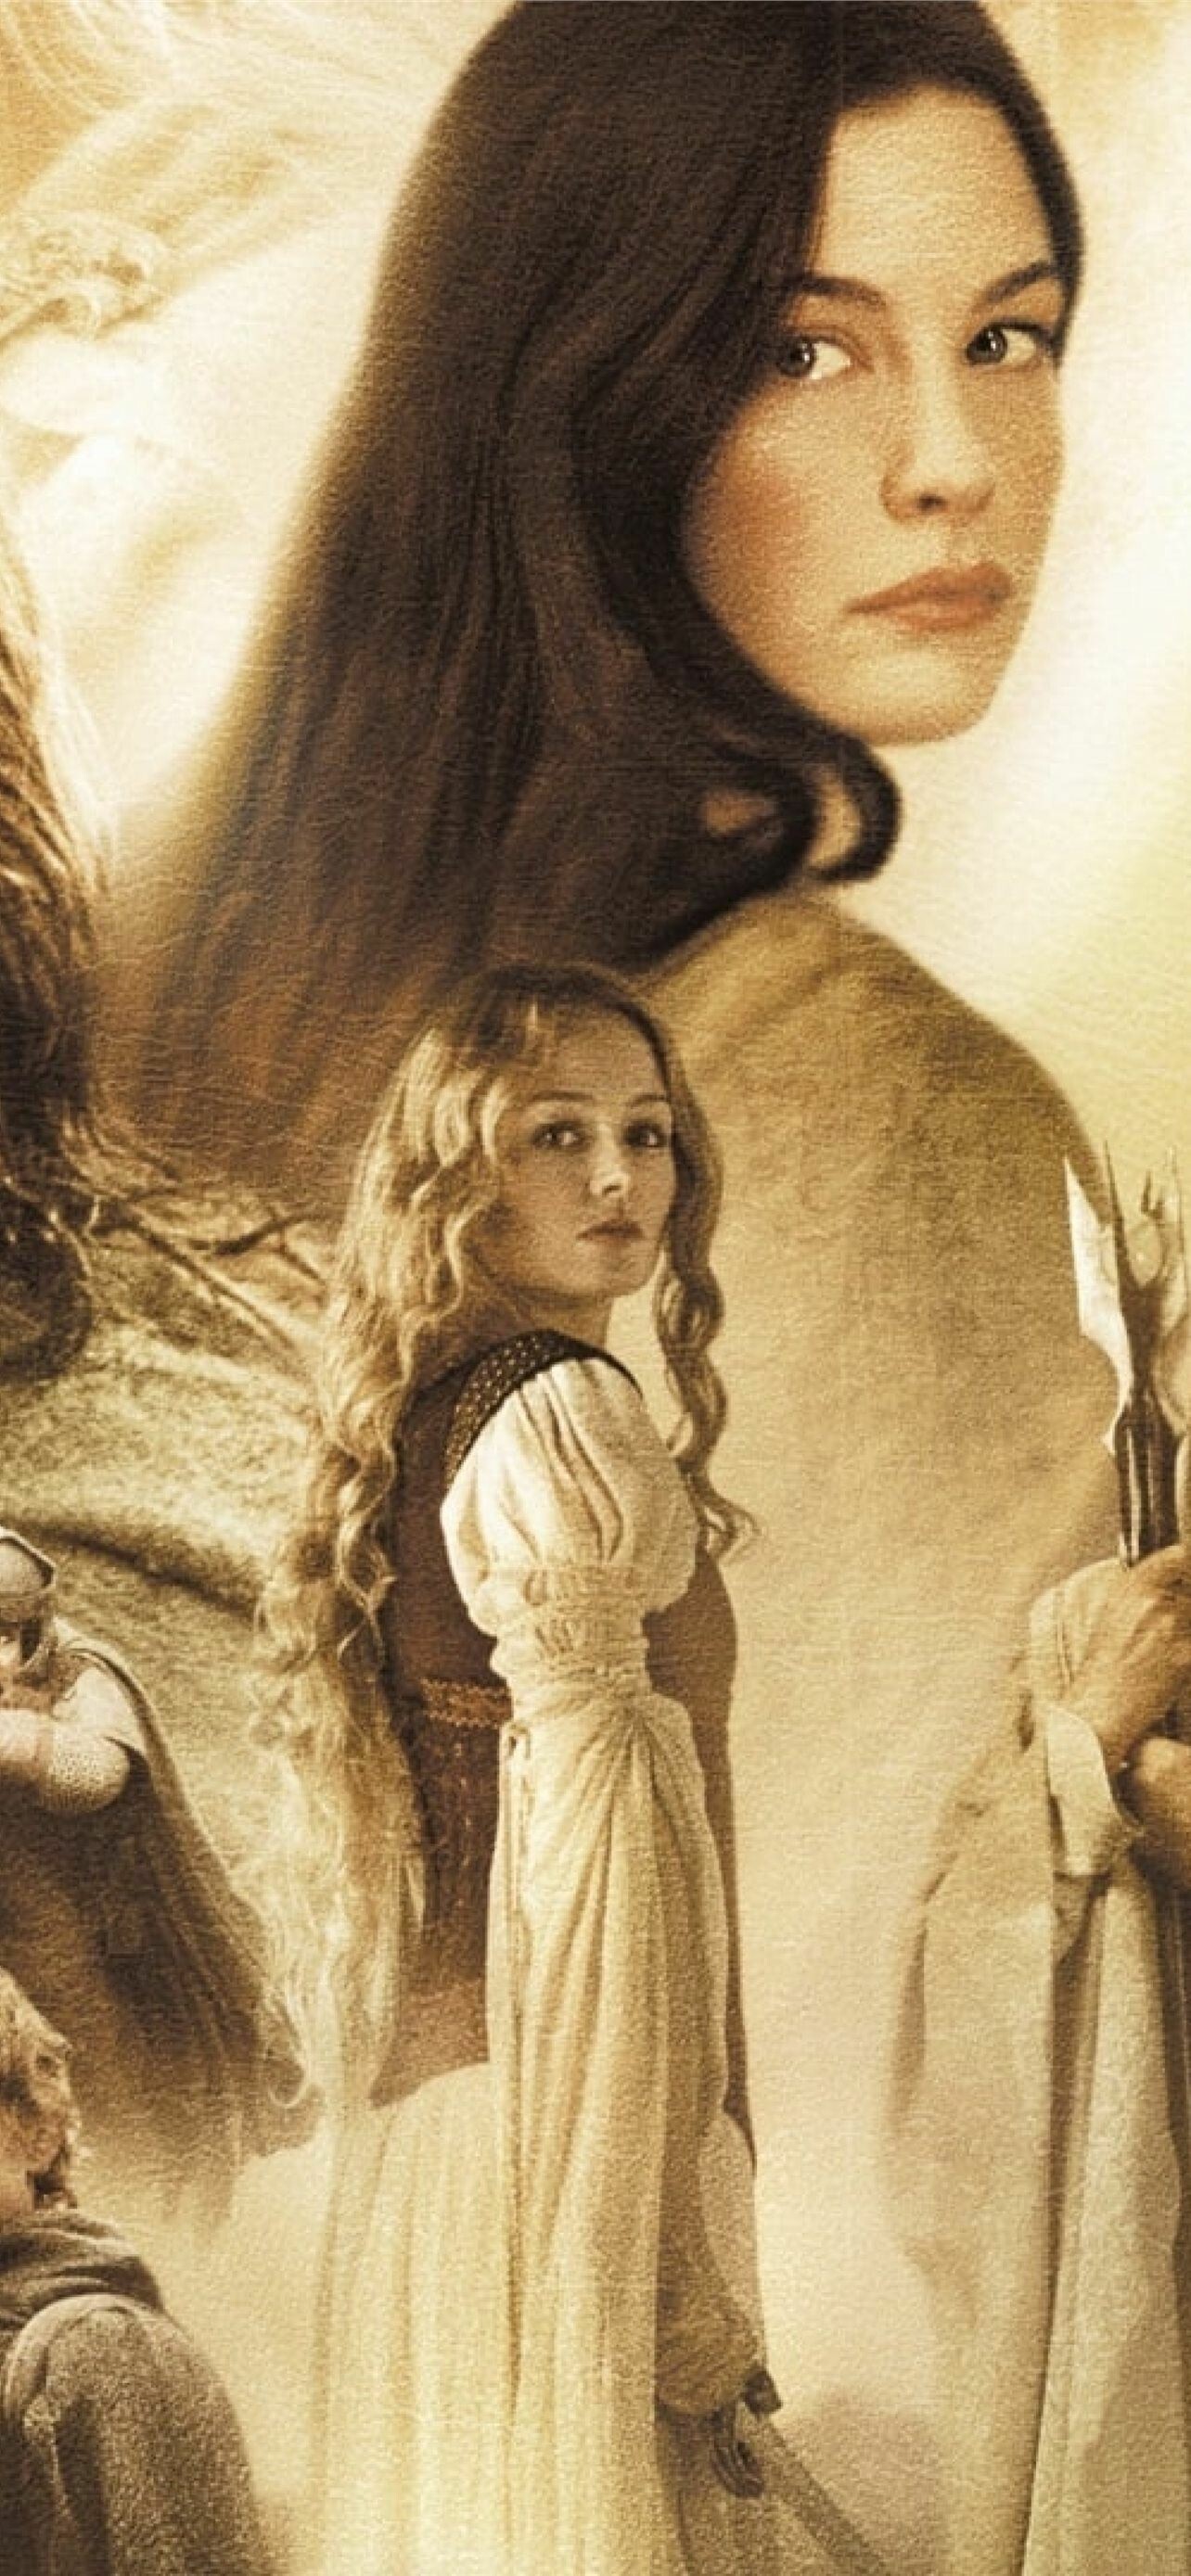 The Lord of the Rings: Eowyn, A noblewoman of Rohan who calls herself a shieldmaiden. 1290x2780 HD Wallpaper.